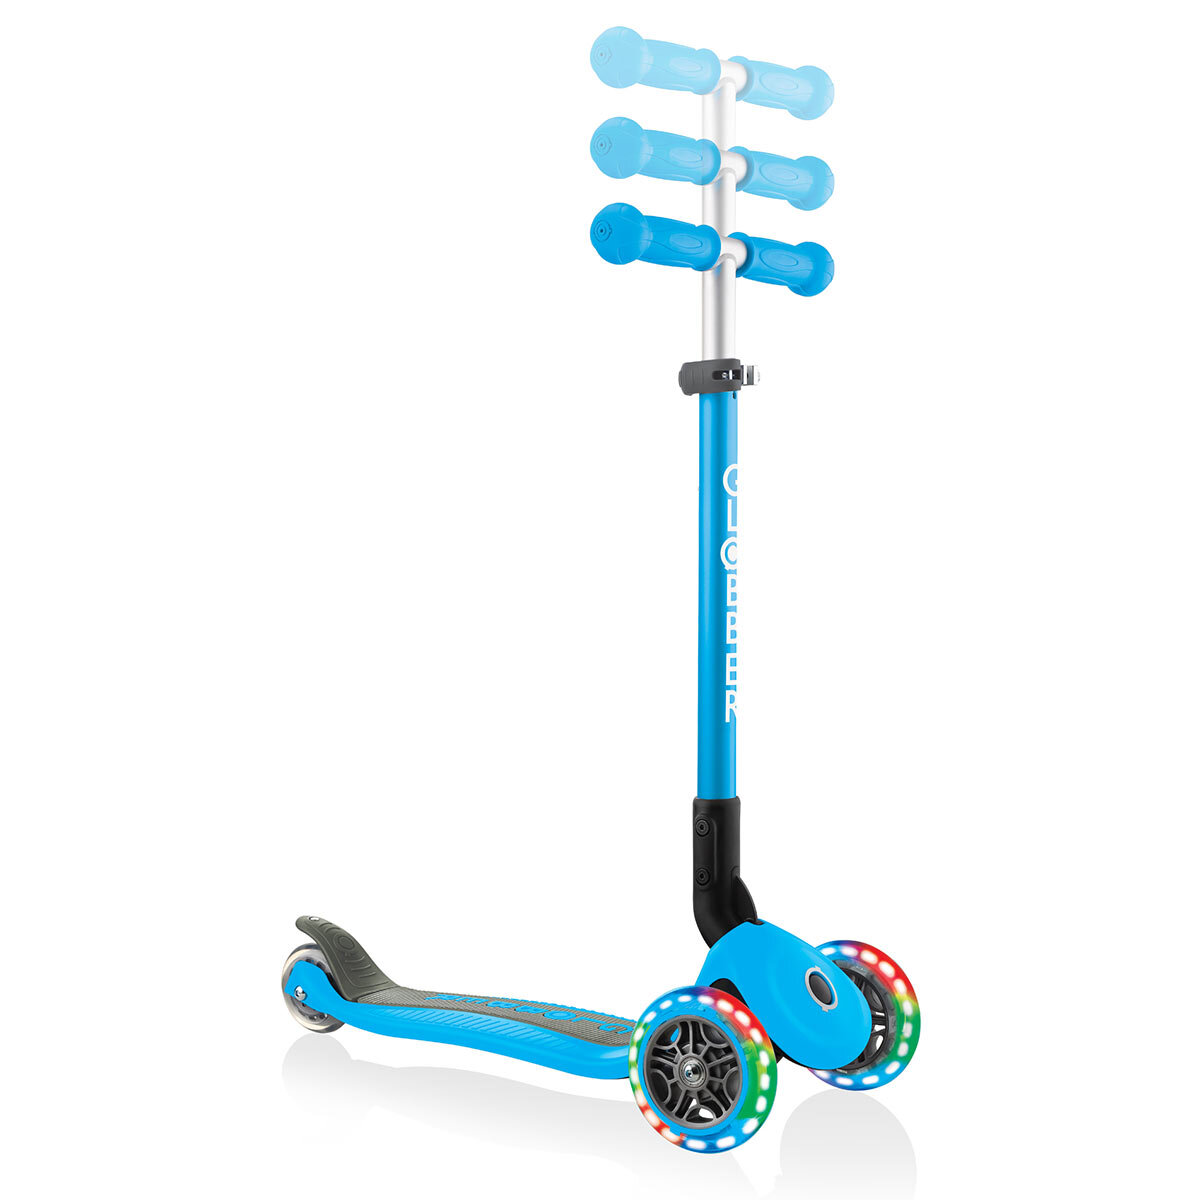 Buy Globber Primo Lights Scooter in Sky Blue 2 Image at Costco.co.uk